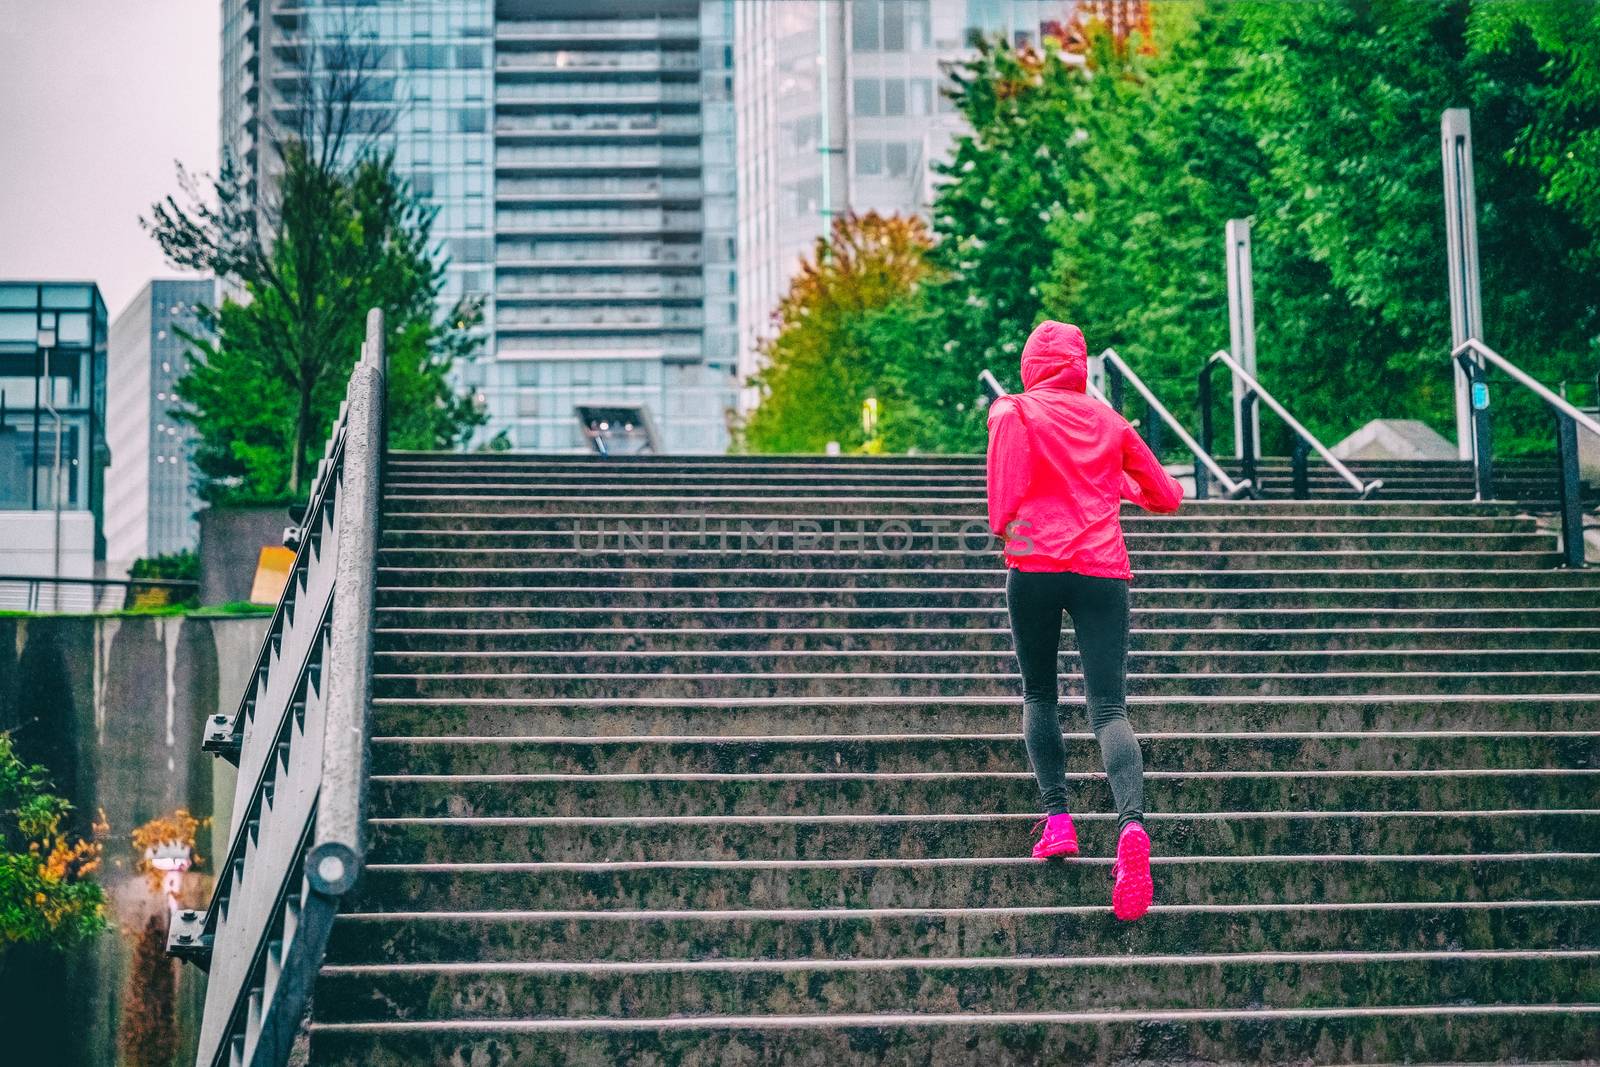 Runner running up the stairs on rain run in Vancouver city. Staircase cardio workout jogger training.